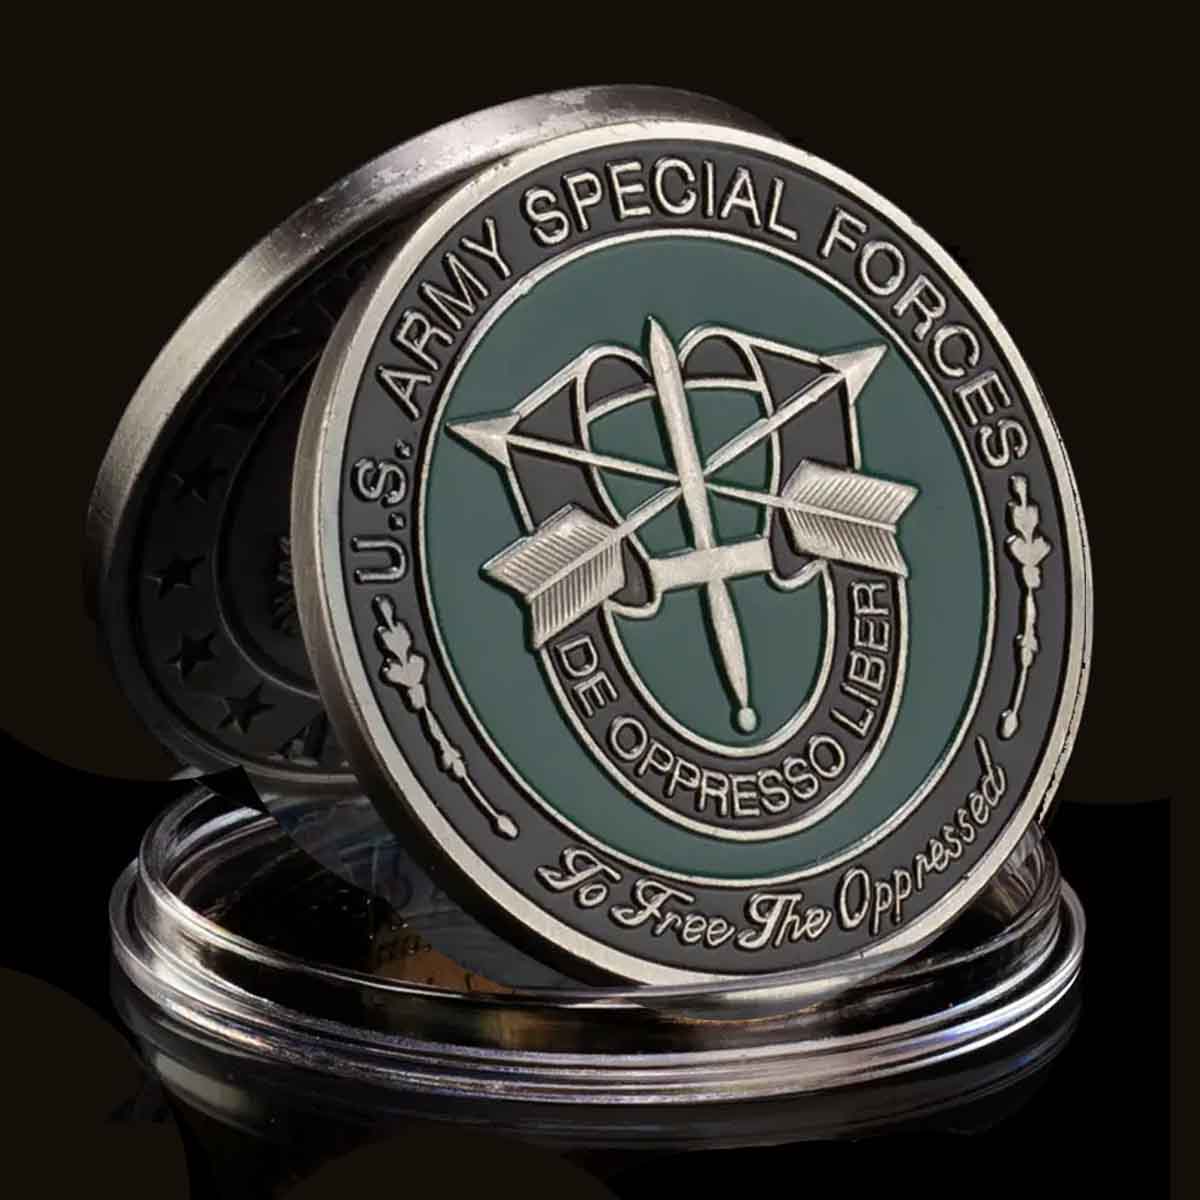 Army Special Forces Golden Plated Commemorative Coin. High-quality golden plating for a stunning shine and durability. Featuring a powerful message of freedom and honor. Perfect as a gift for Special Forces active duty and veterans.Comes in a protective plastic case to preserve its beauty and value. Patriot Gear USA